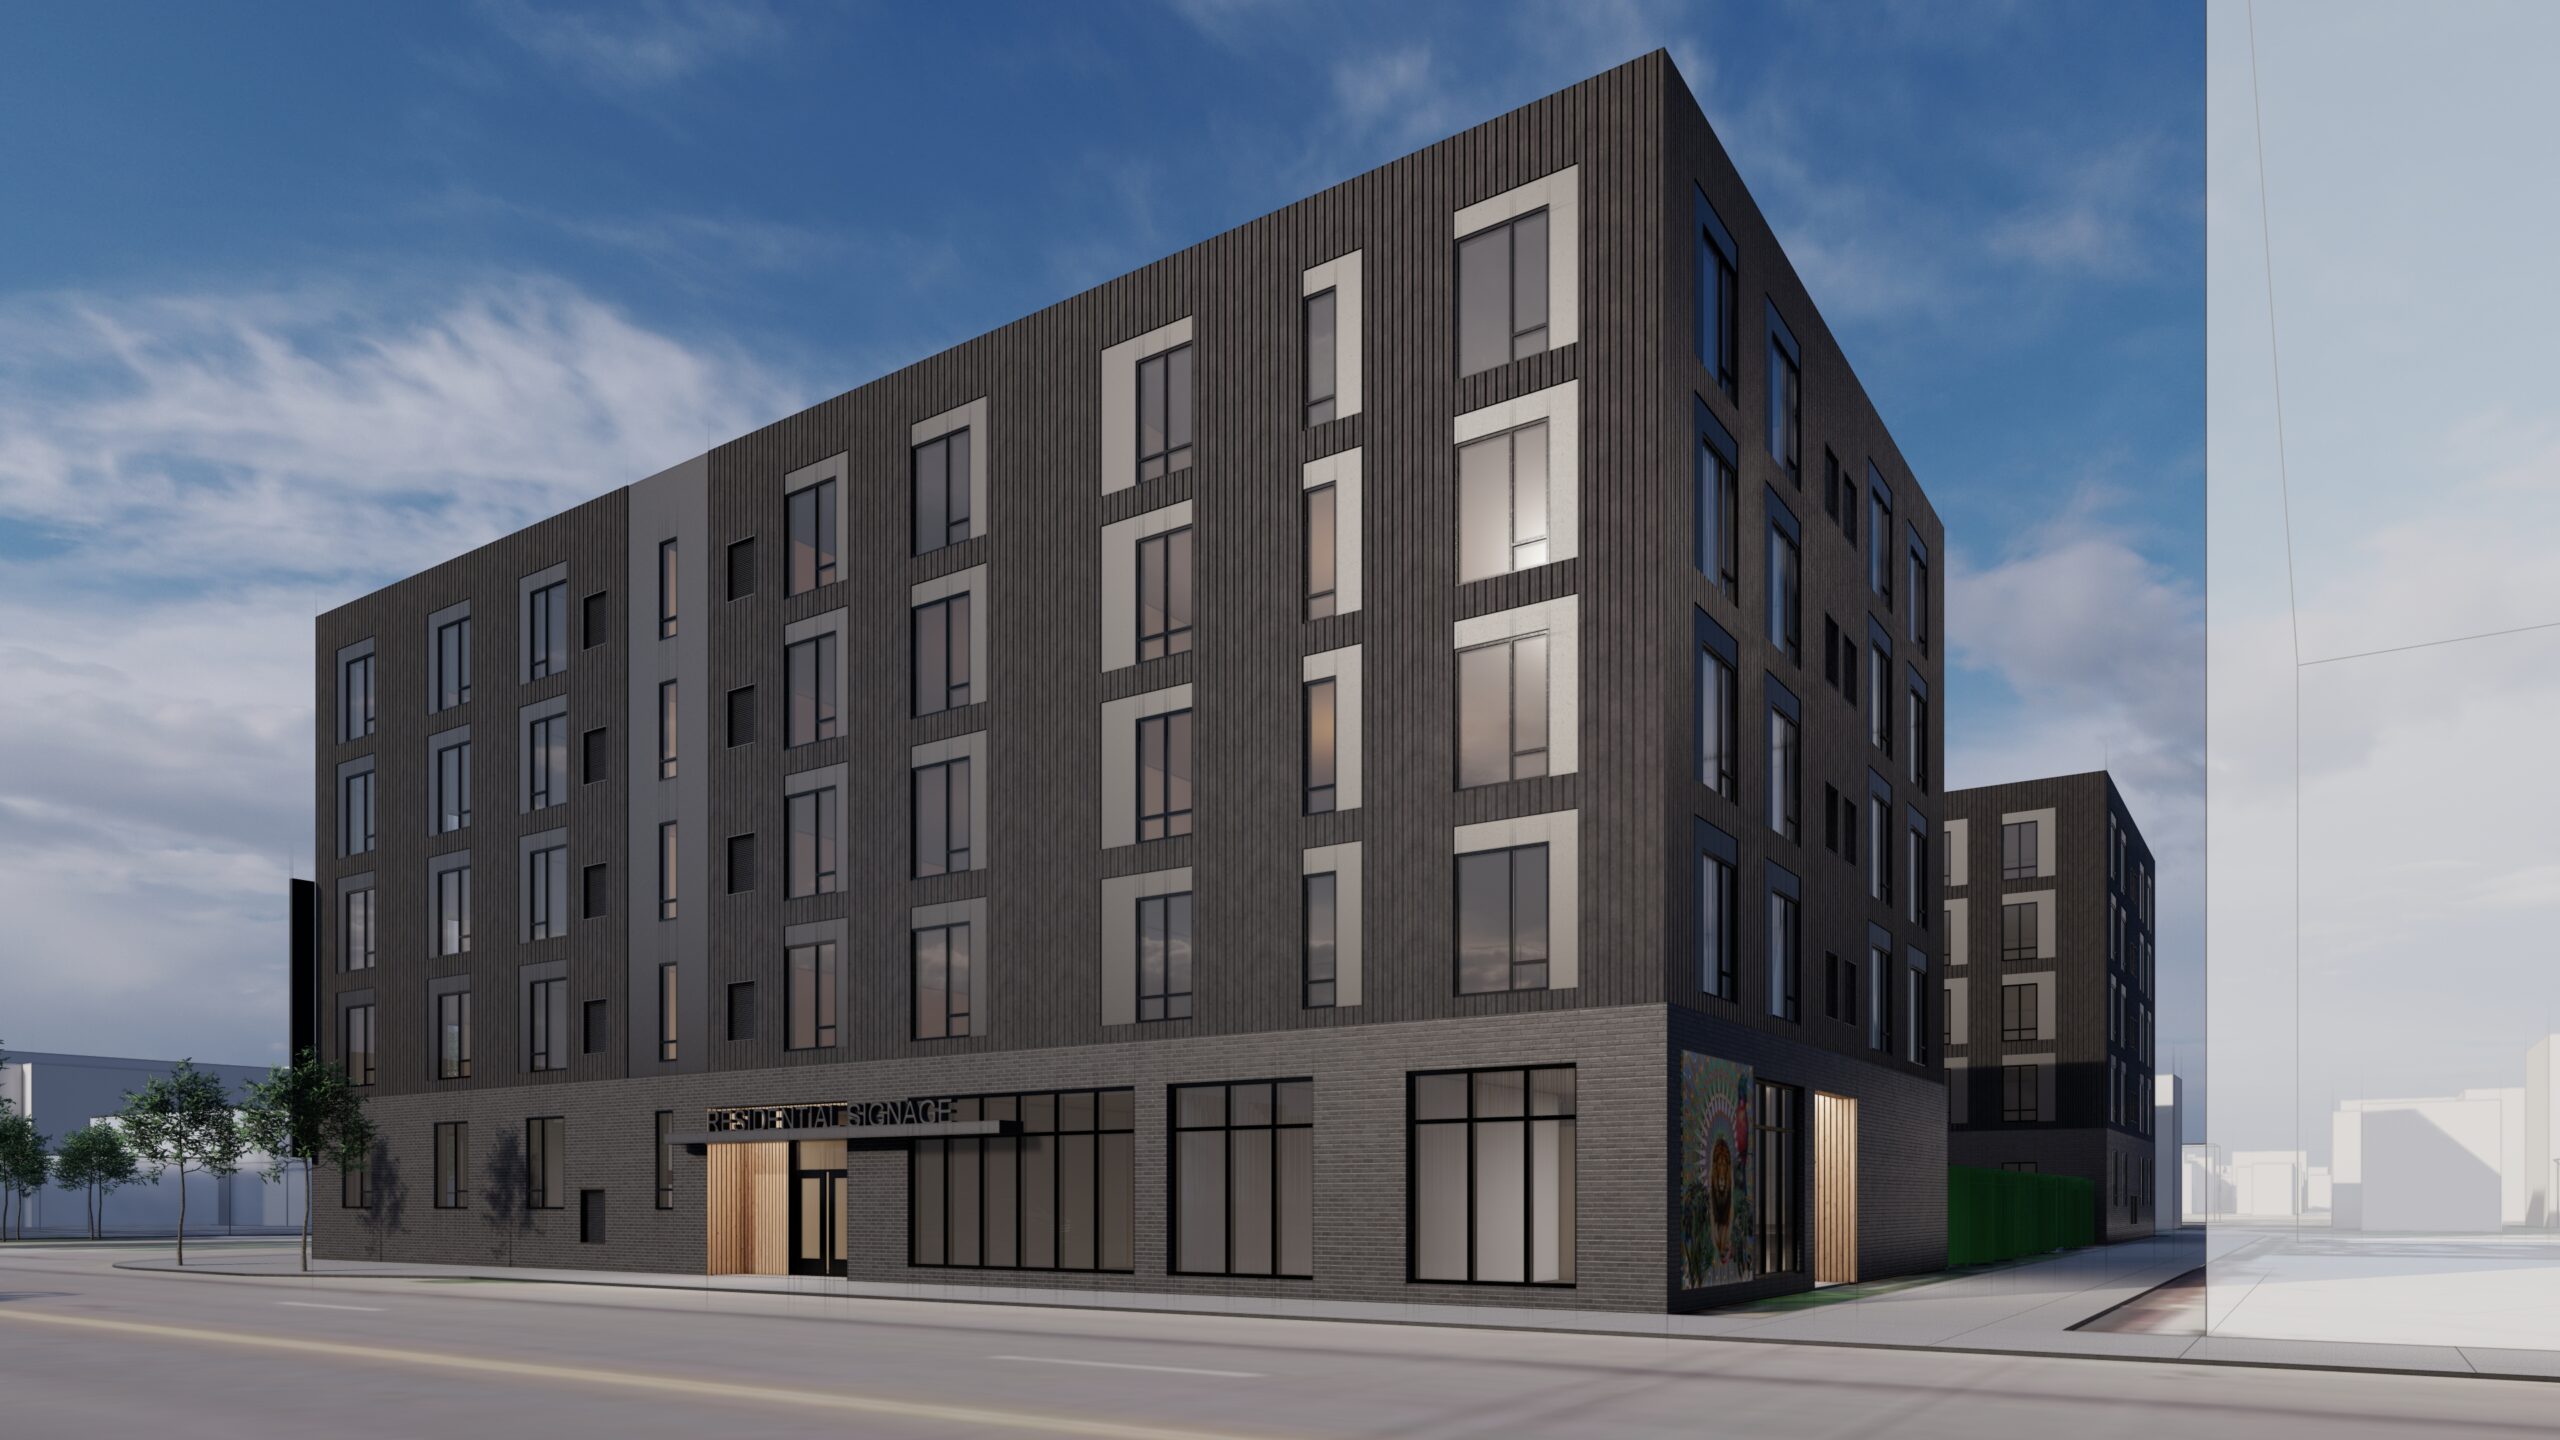 Lupe updates plans for final phase of its Lyn-Lake housing project, with 91 affordable units